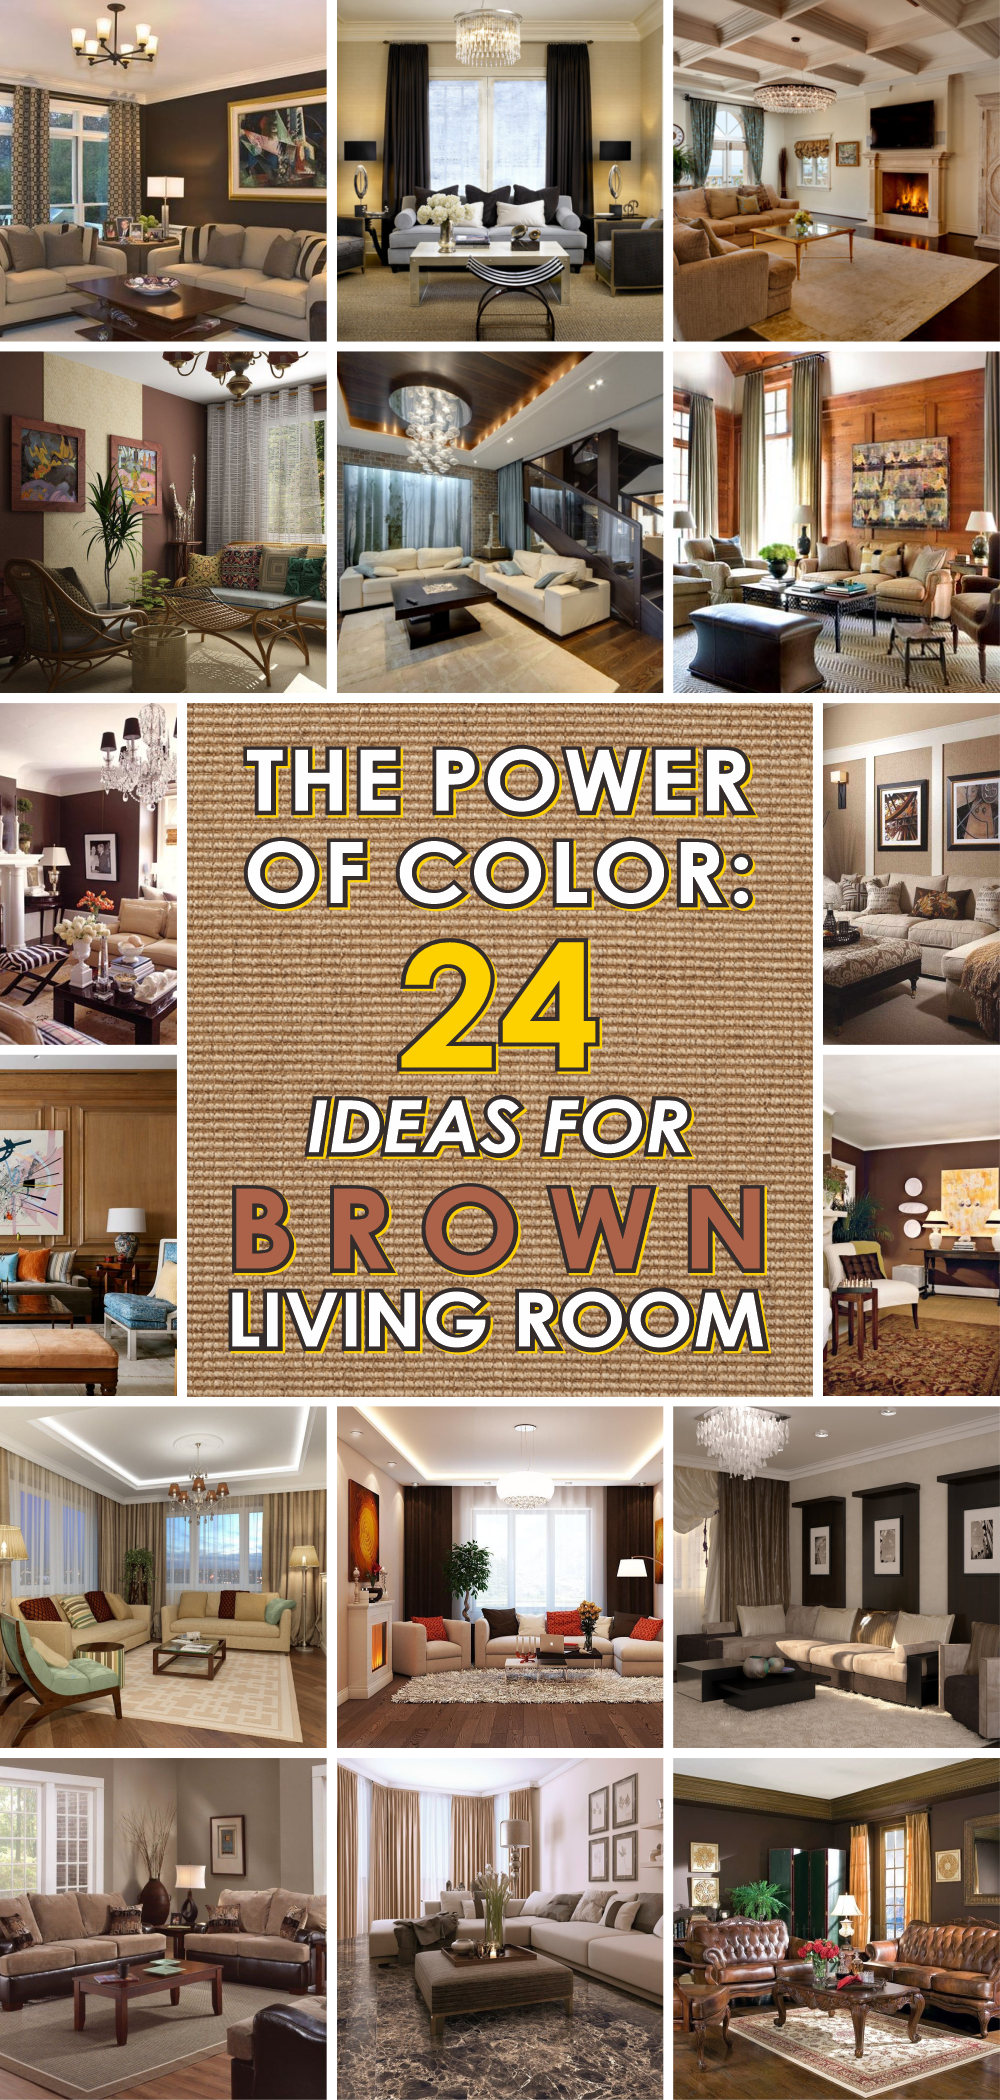 The Power of Color: 24 Ideas for Brown Living Room - Talkdecor